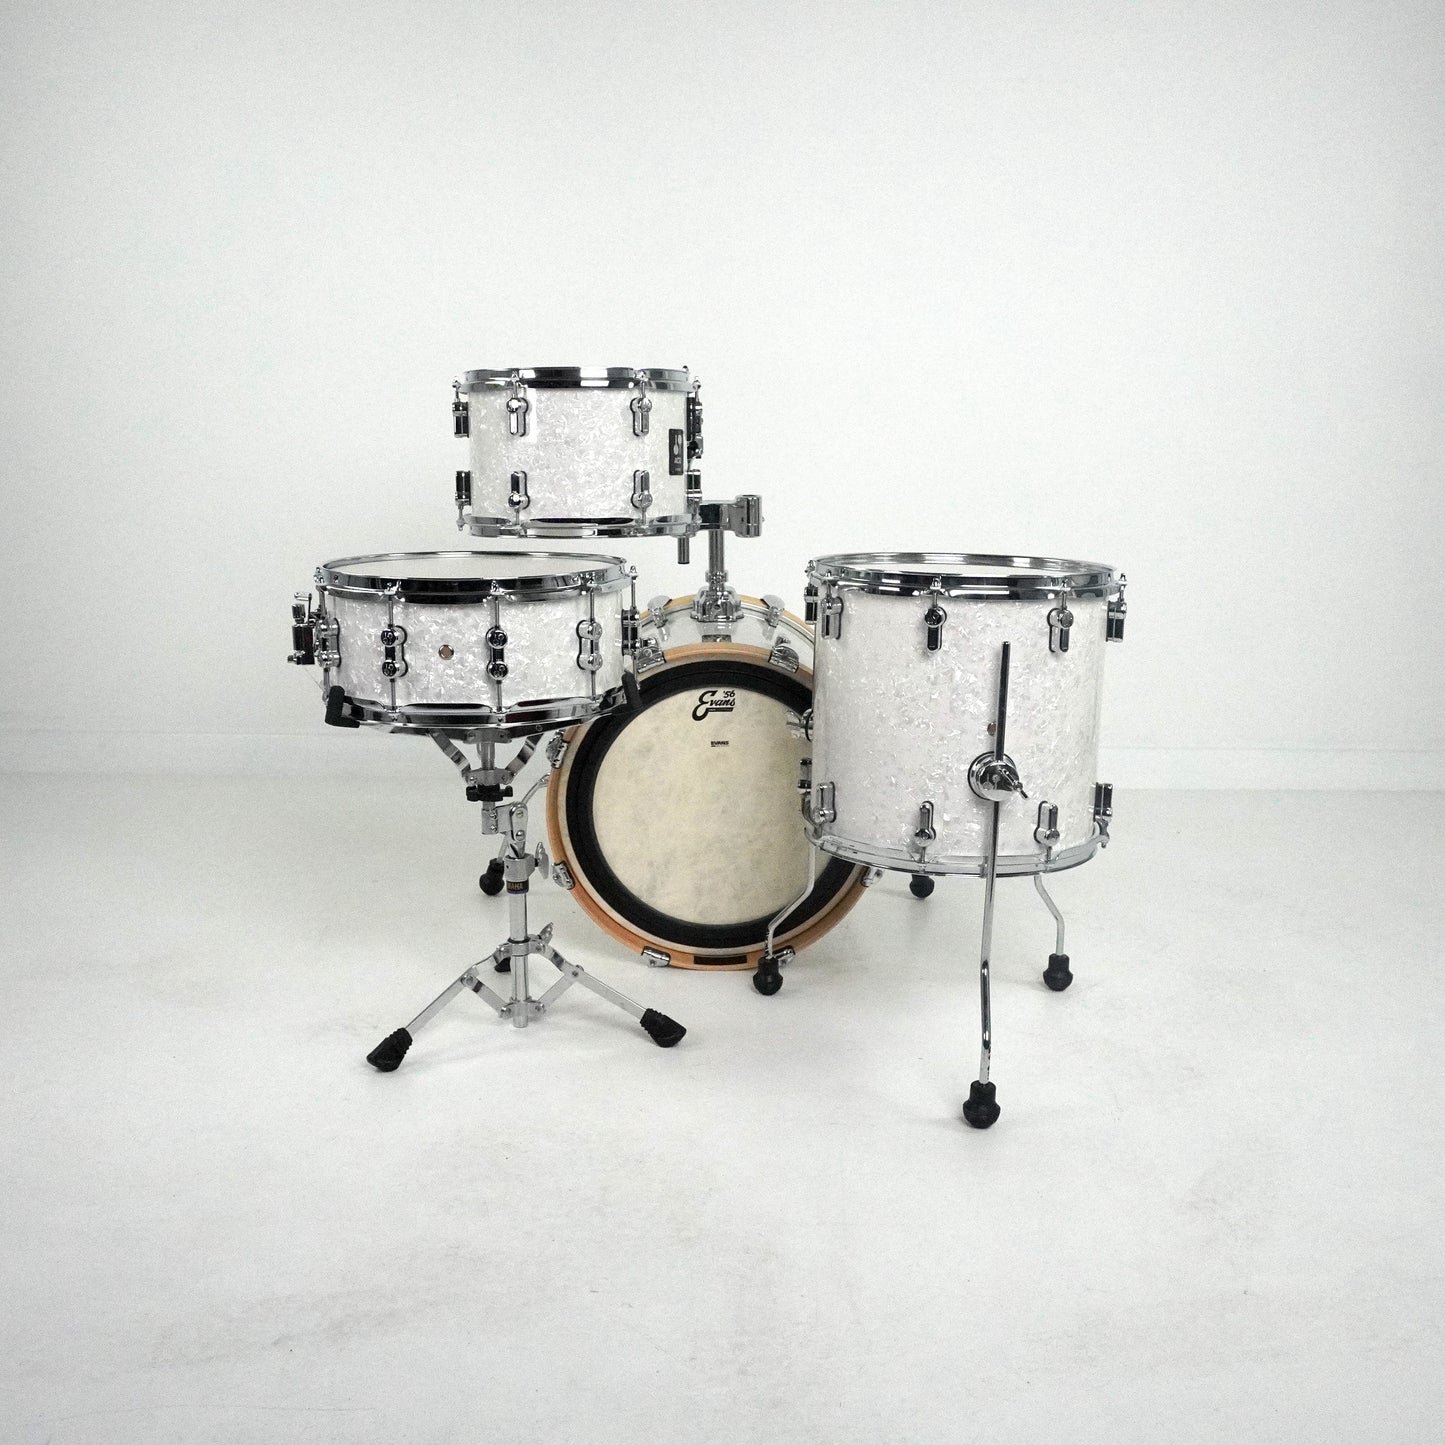 Sonor AQ2 4-piece Drum Kit in White Pearl